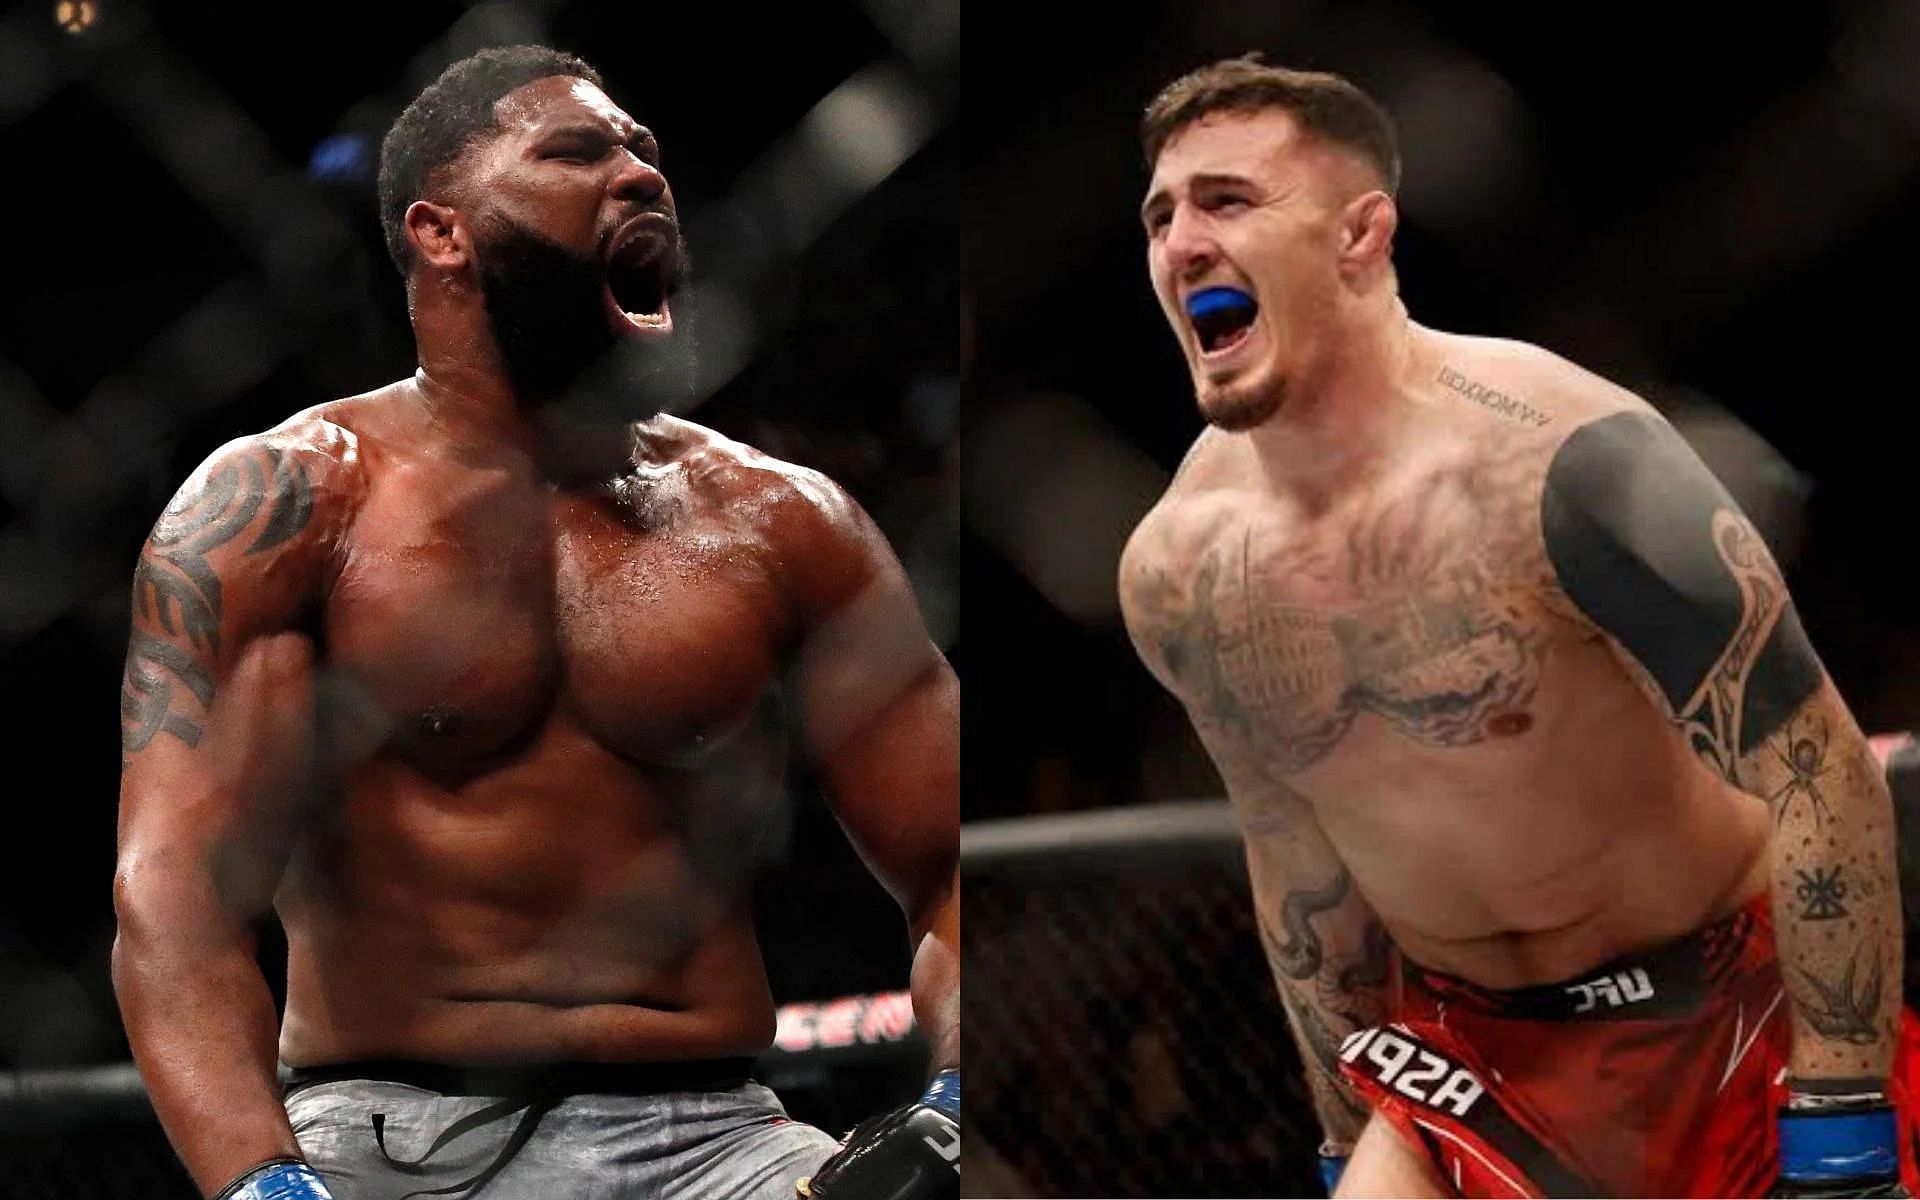 UFC heavyweights Curtis Blaydes (left) and Tom Aspinall (right)